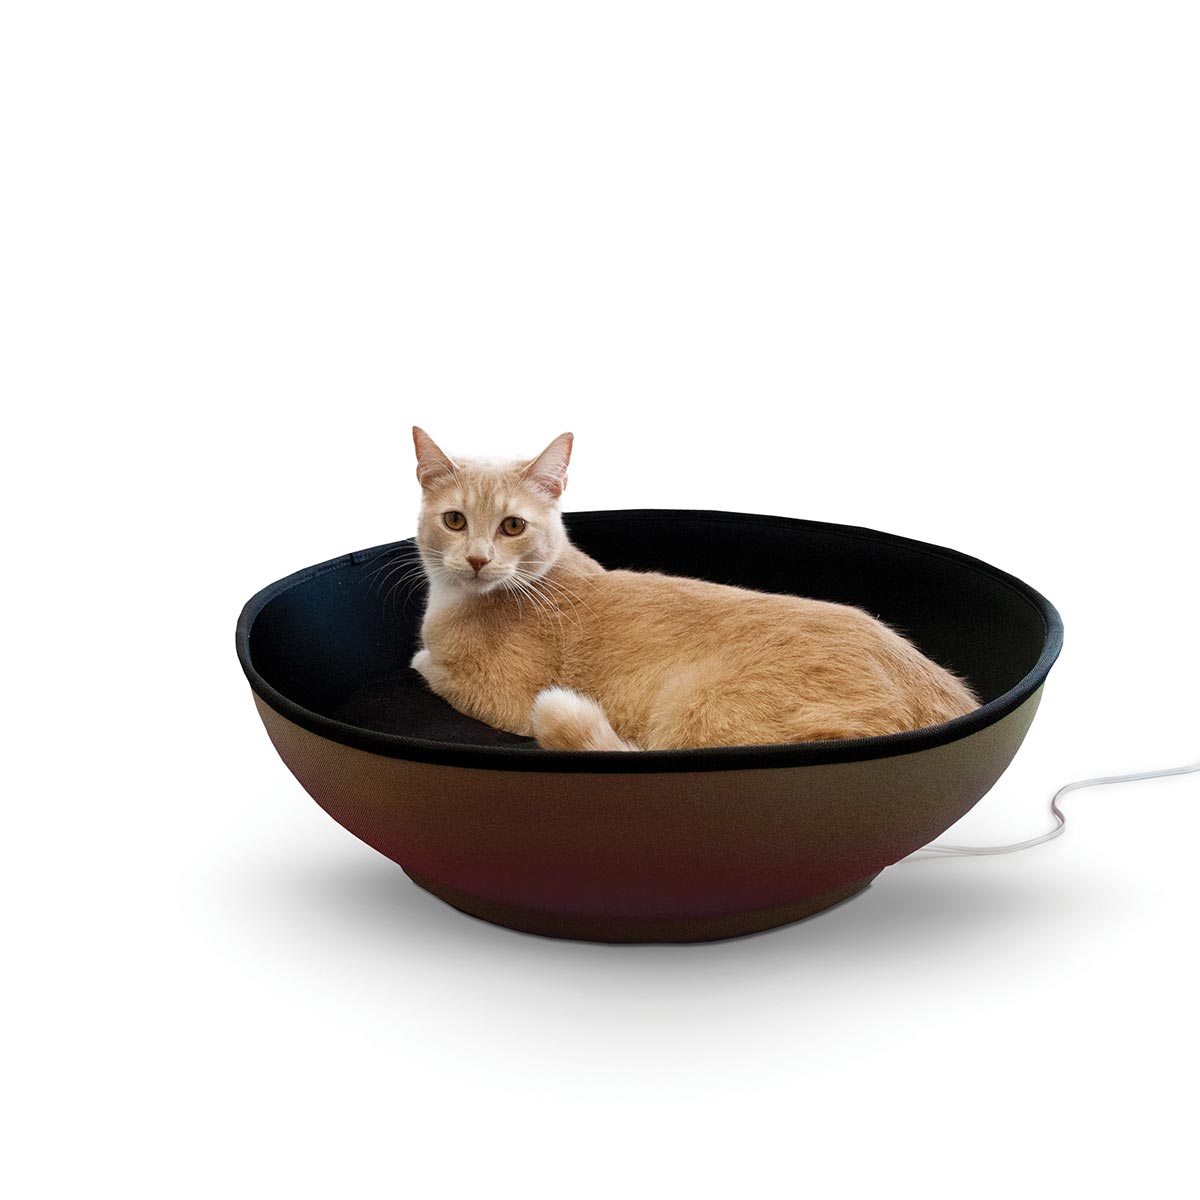 K&h Pet Products Kh5391 Thermo-mod Half-pod Pet Bed